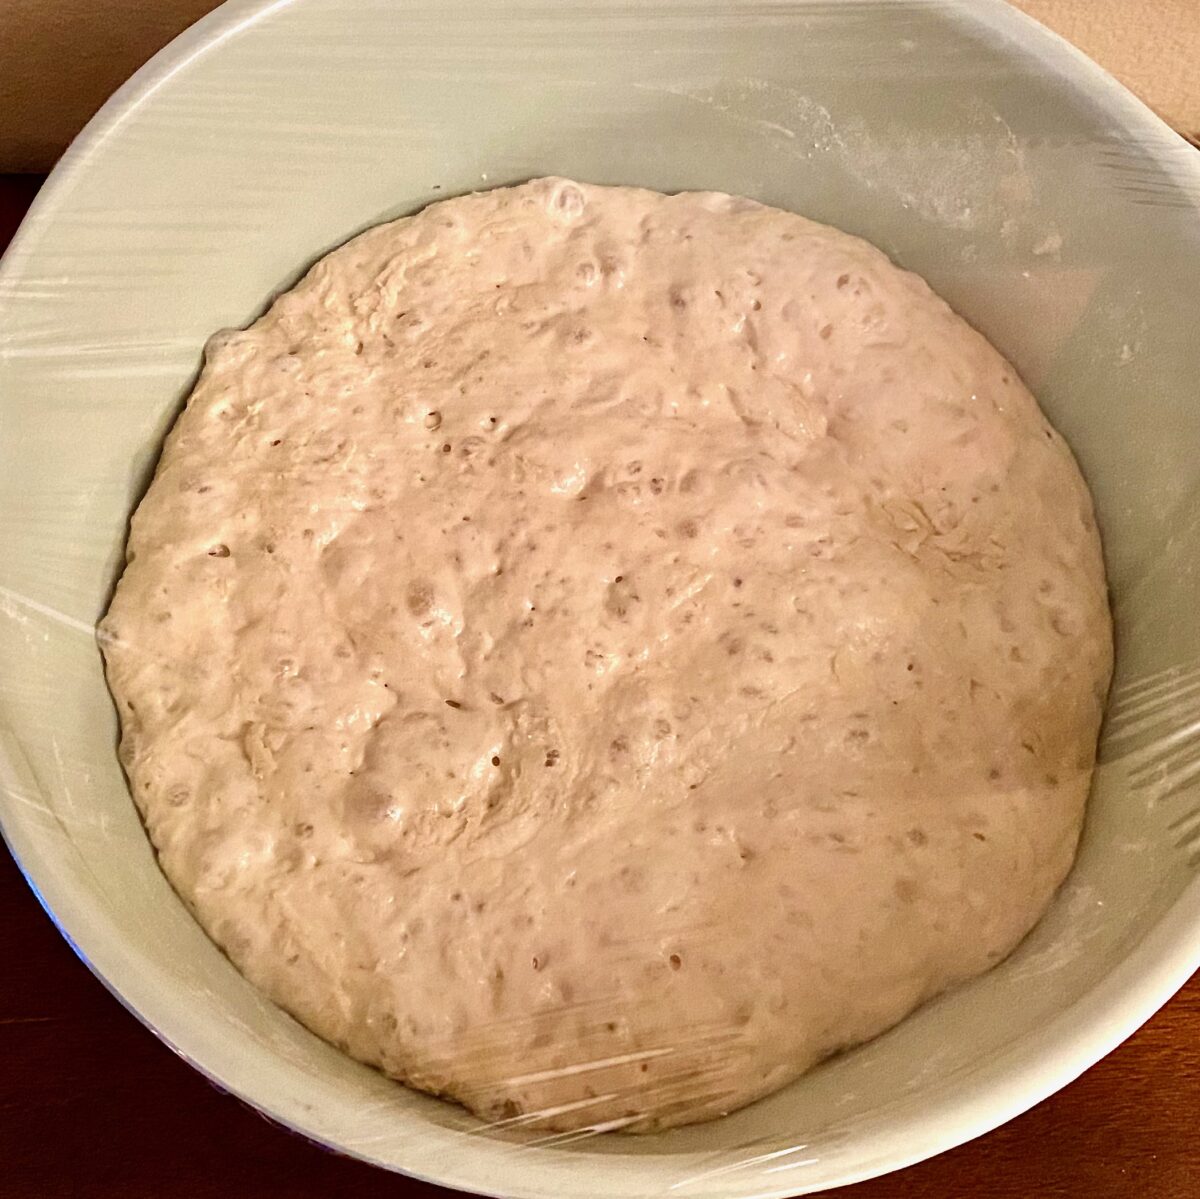 The dough after a long, room temperature proof. Bubbles have formed on the top of the dough, which is exactly what we want.